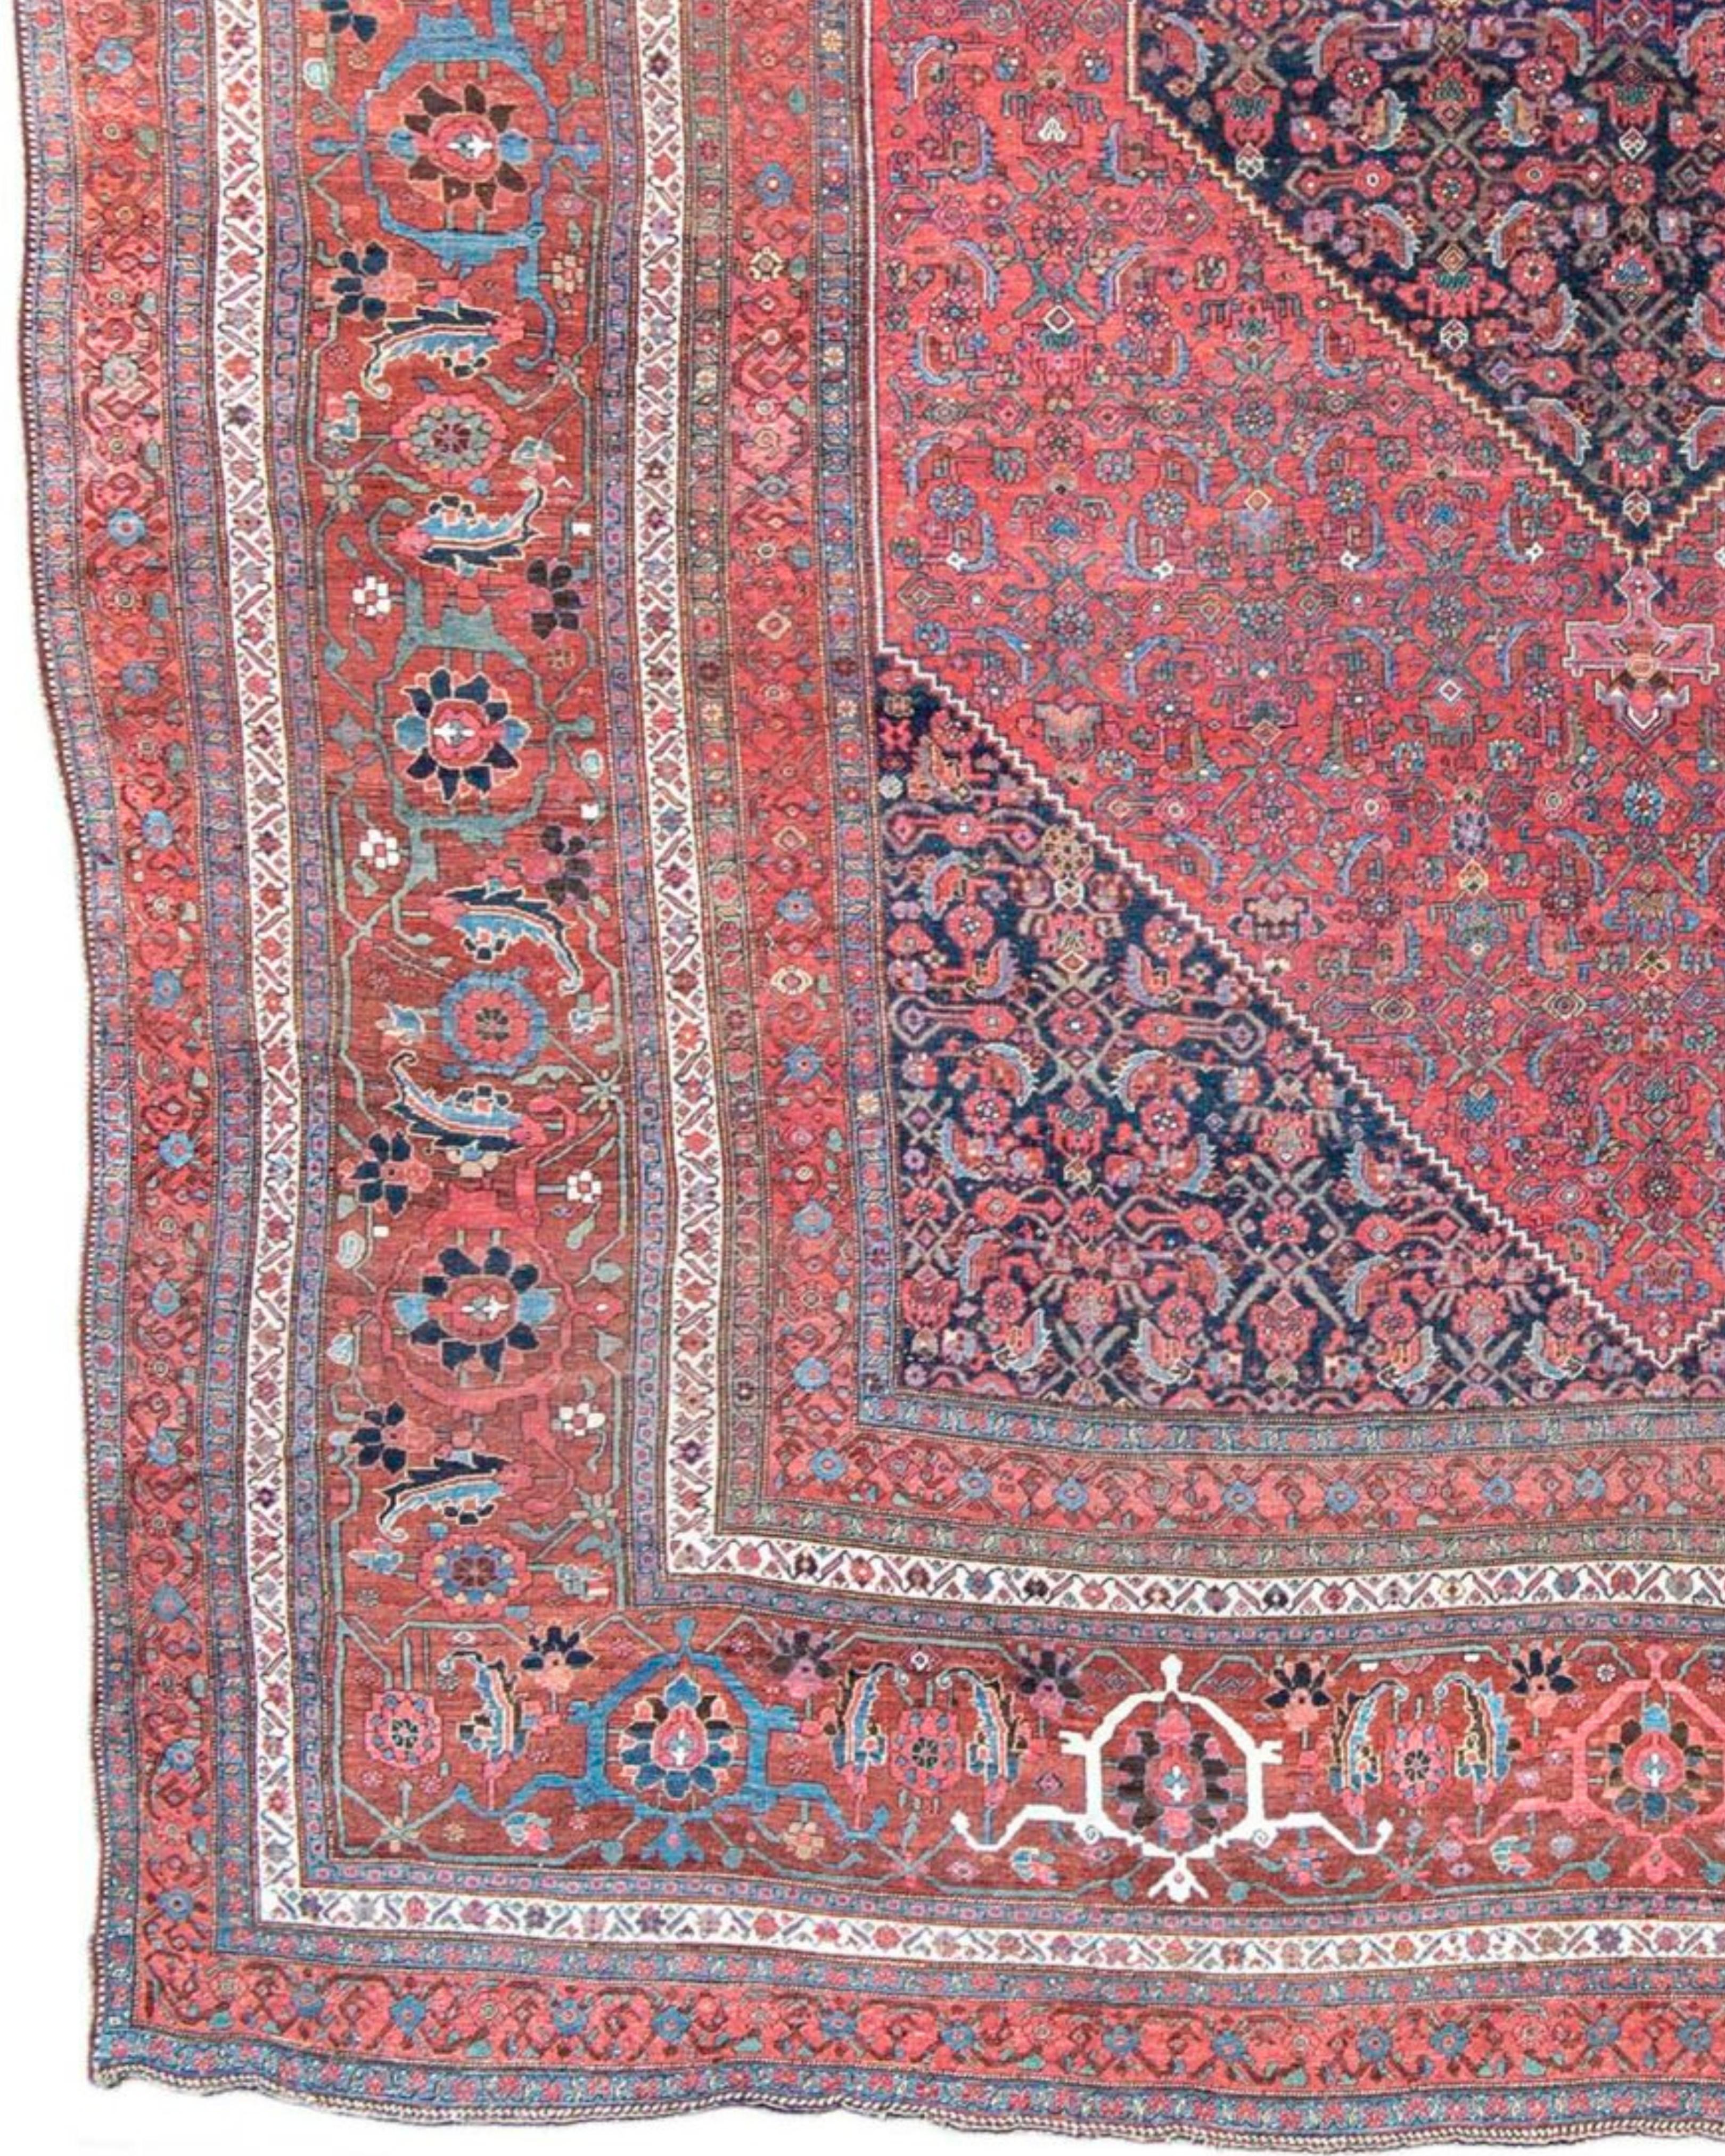 Hand-Knotted Large Antique Persian Bidjar Carpet, Late 19th Century For Sale